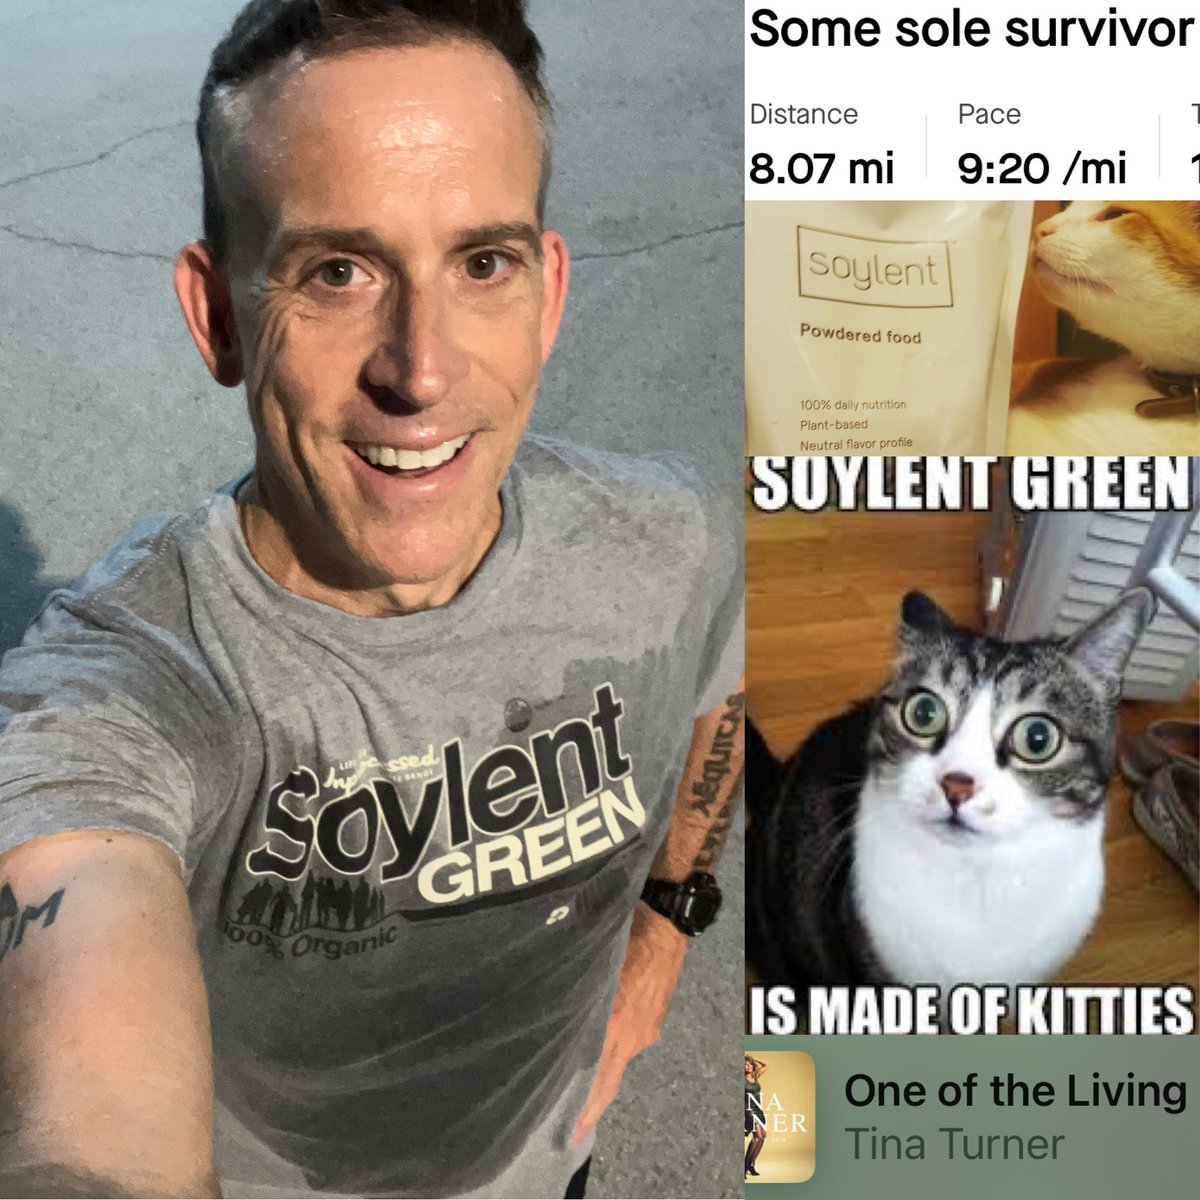 Seriously, make it an option like being an organ donor. If you want to become Soylent Green, you help feed the masses. I’d rather get nutrients from volunteer human protein chips than something we kill. #ideas #soylentgreen #itsnotkitties #food